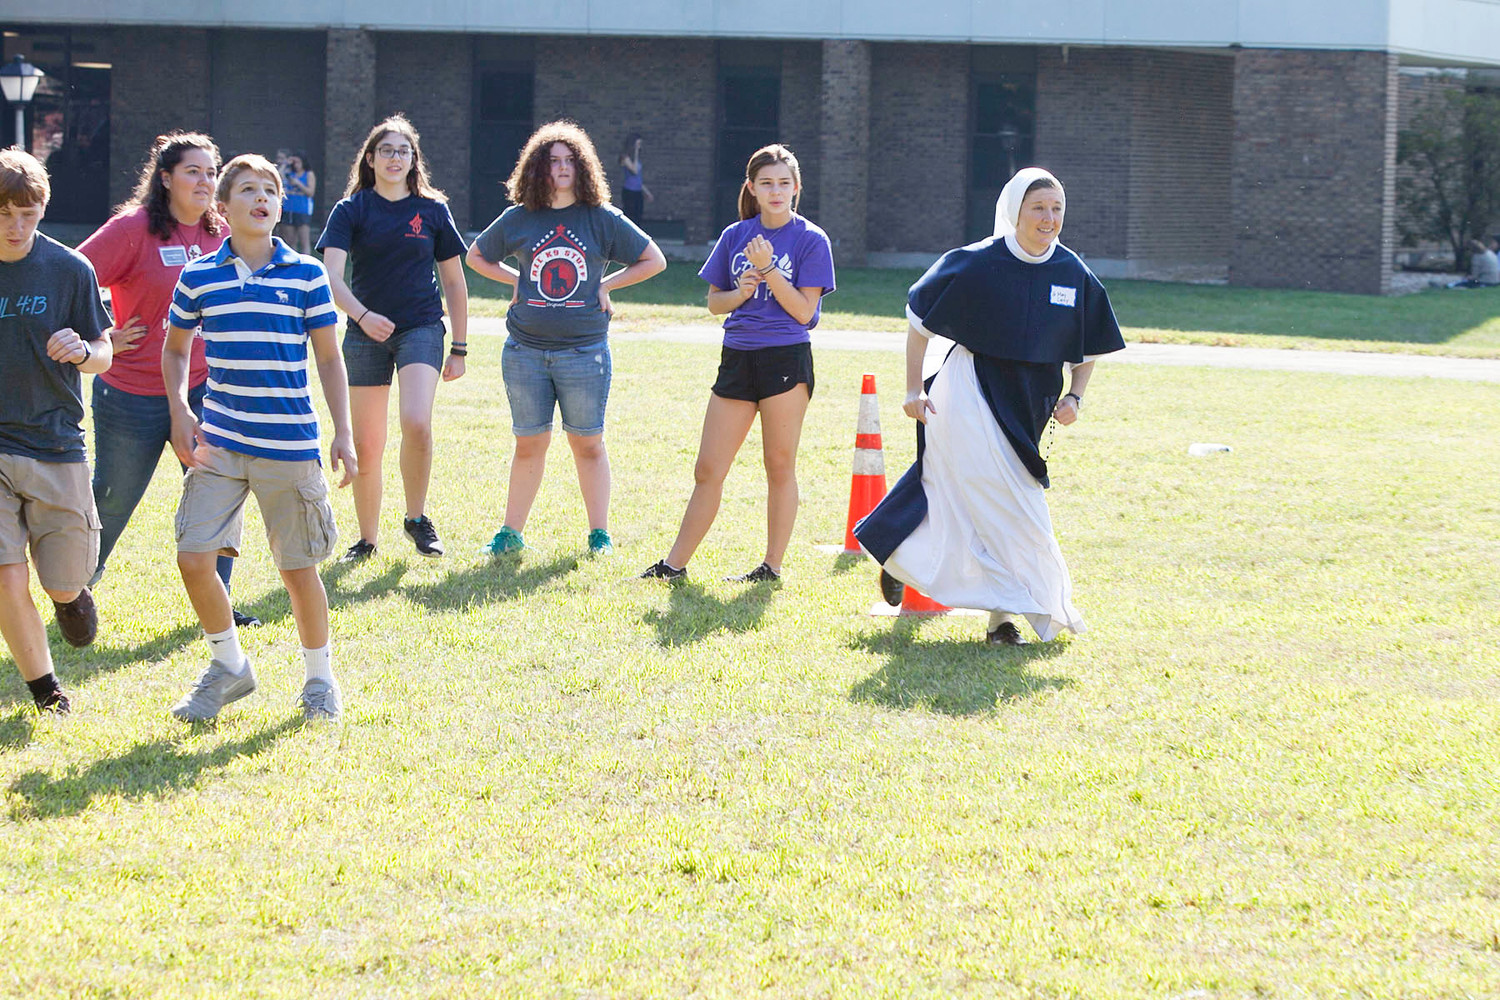 Sister Mary Casey, S.V., joins teens for a game of Frisbee football.